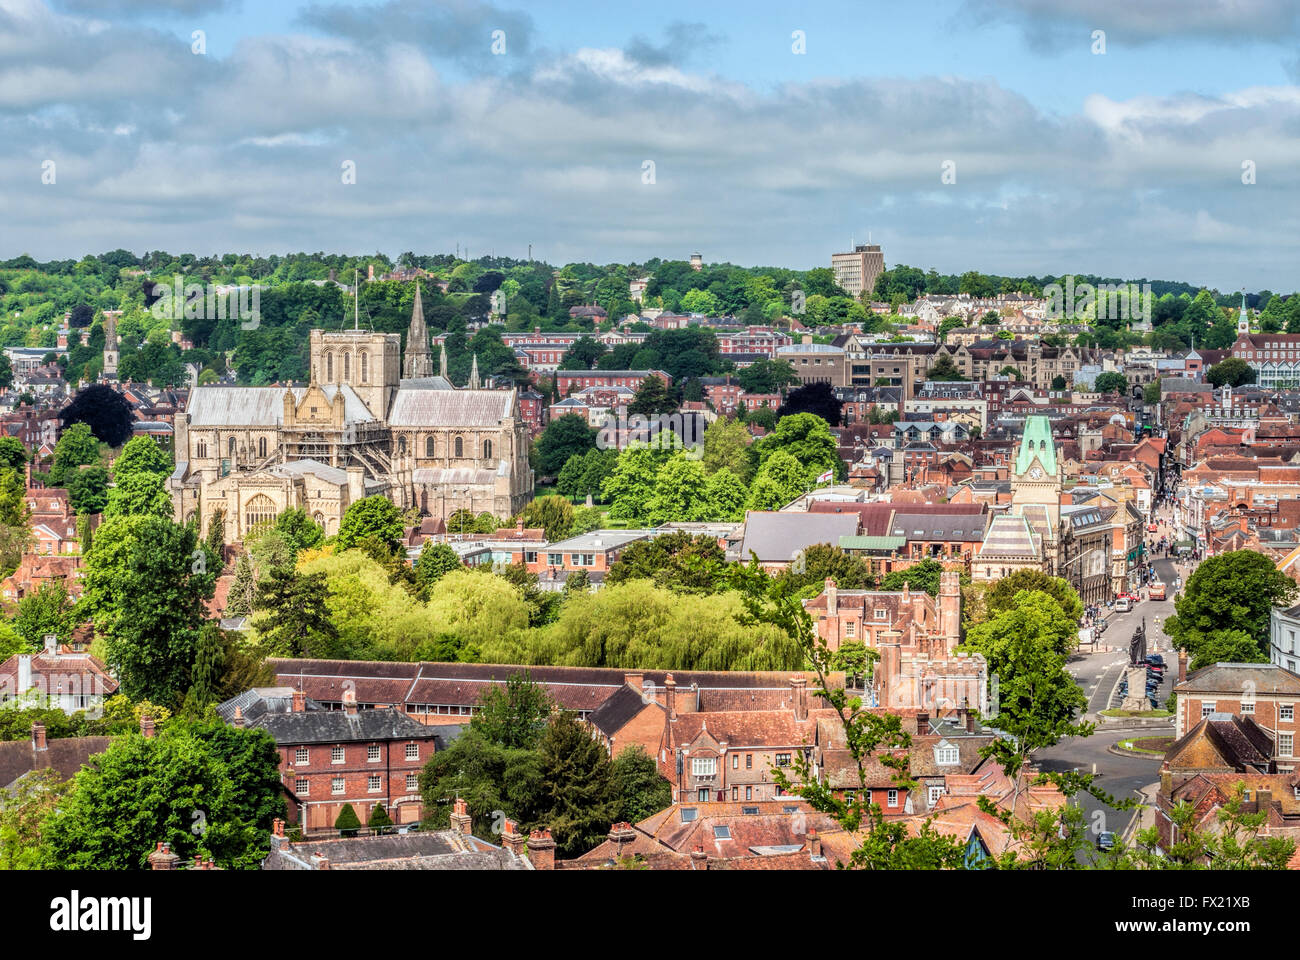 View over the historical old town center of Winchester, Hampshire, England. Stock Photo